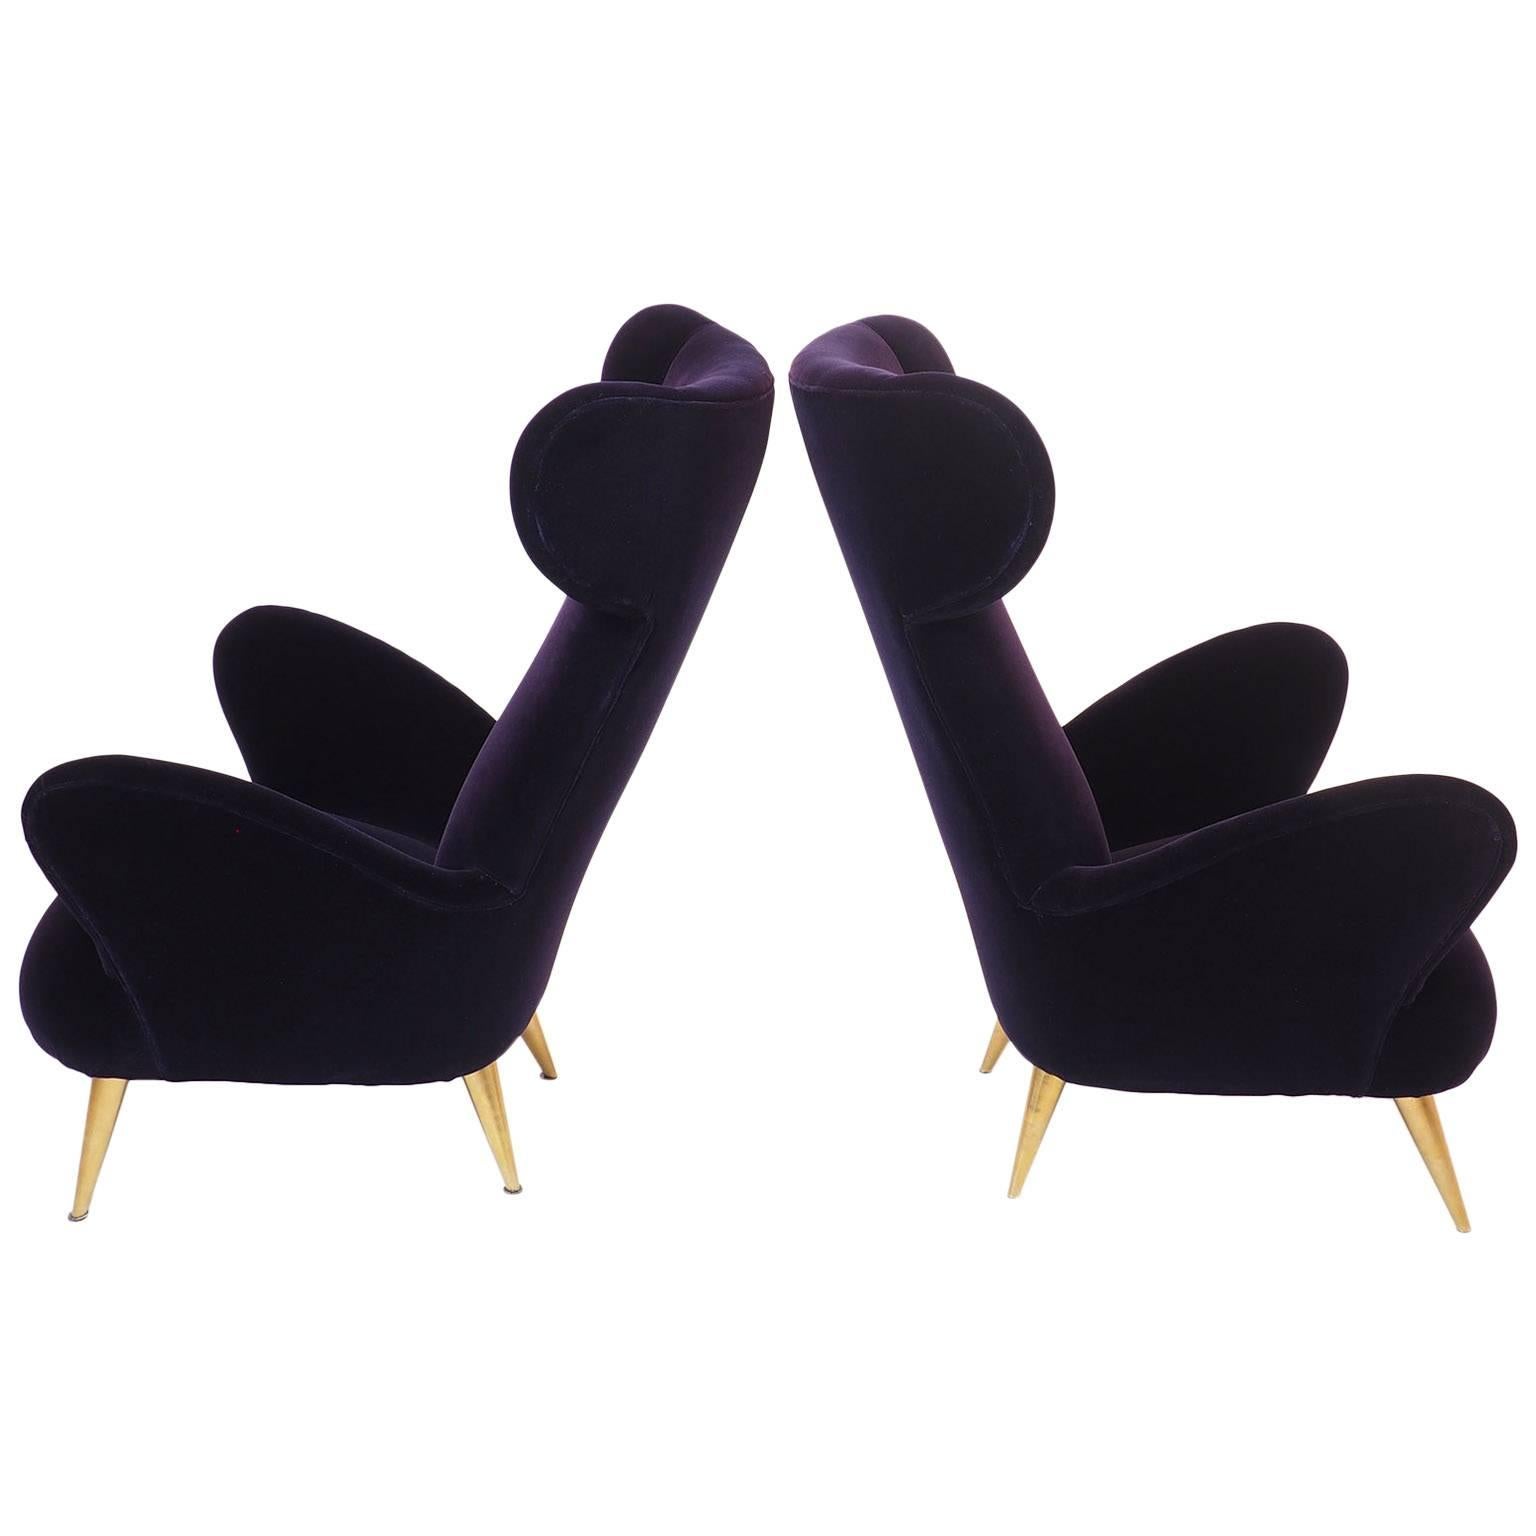 Rare and magnificent armchairs clearly inspired by the world of Carlo Mollino during 1950s in Torino;
This exclusive and unique exemplar of armchairs, express the special manufacture of the  Scuola Torinese during 1950s.
A comfortable and special